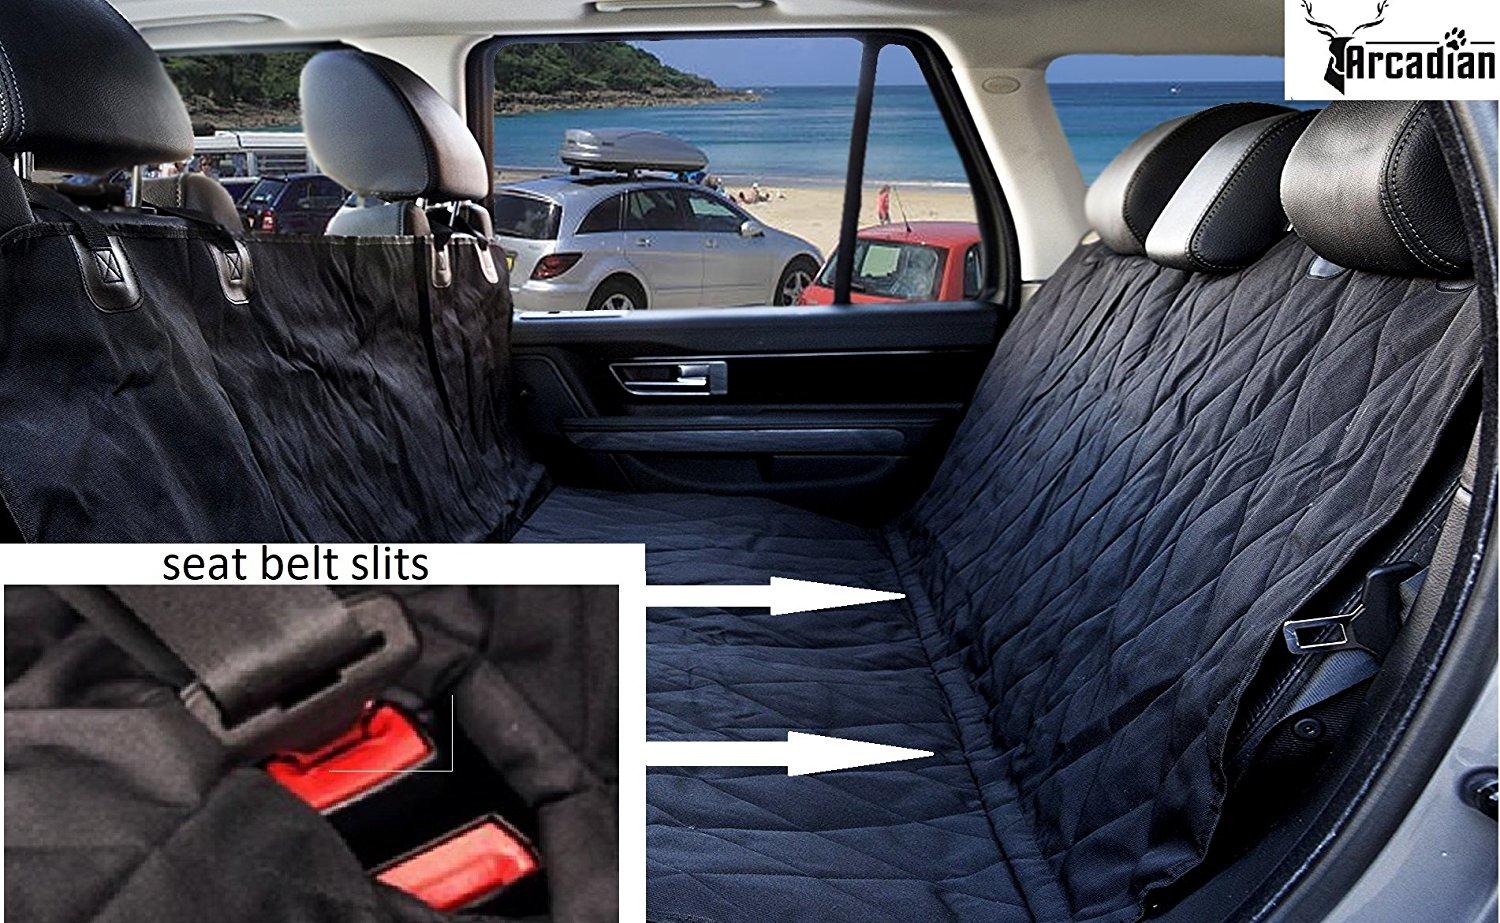 Dog Car Seat Cover by Arcadian -Waterproof,Scratch and Stain Proof Covers